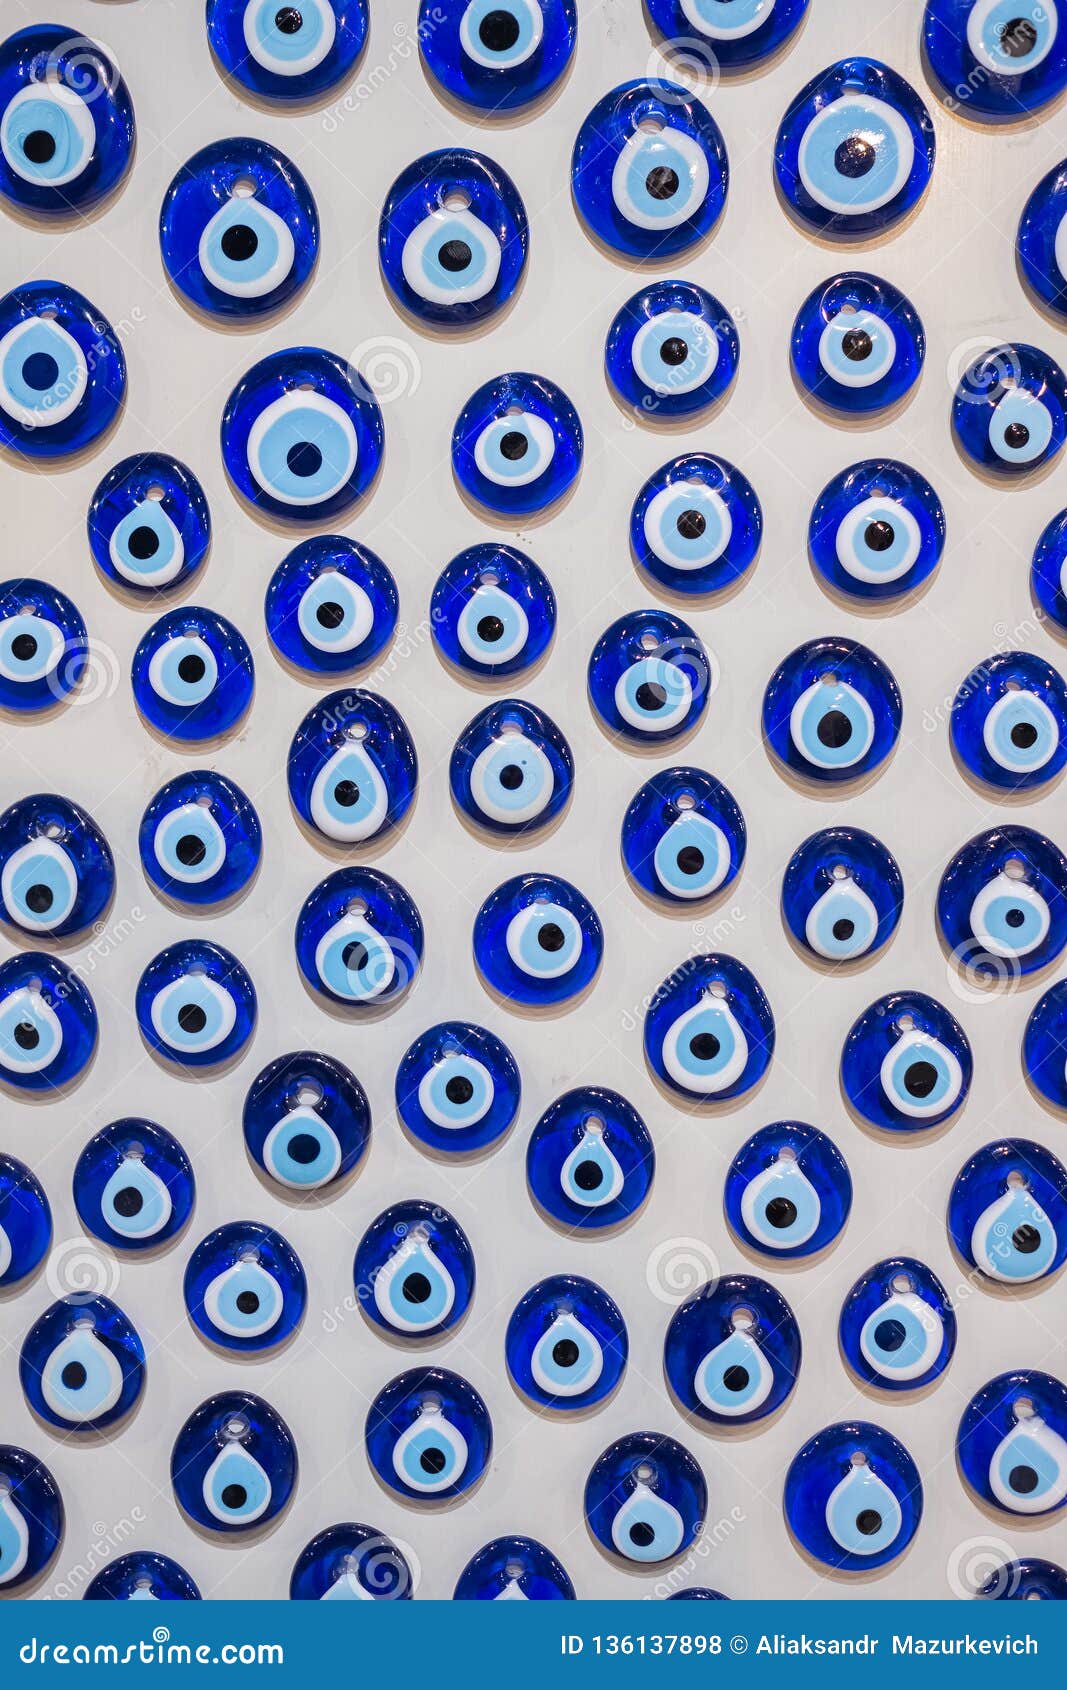 Where To Keep Evil Eye At Home All you need to know about placing Evil Eye  in your home   Times of India